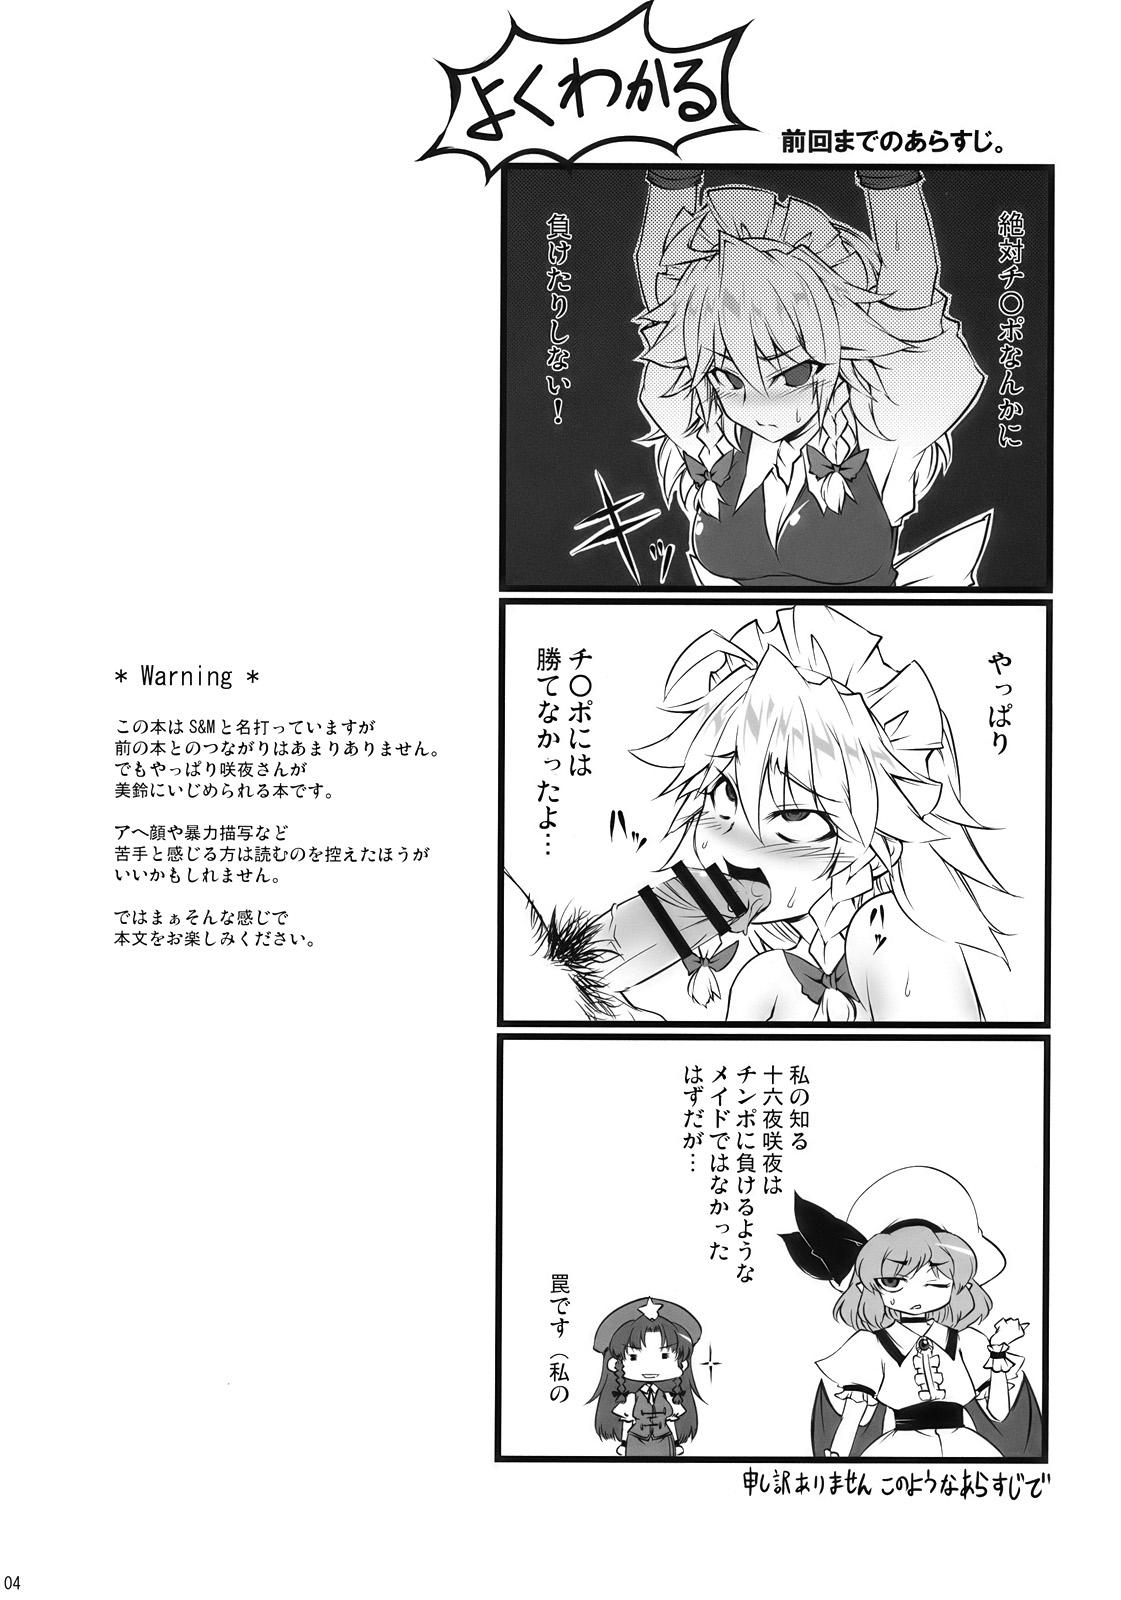 Ametur Porn S&M Violence - Touhou project Small Tits Porn - Page 4